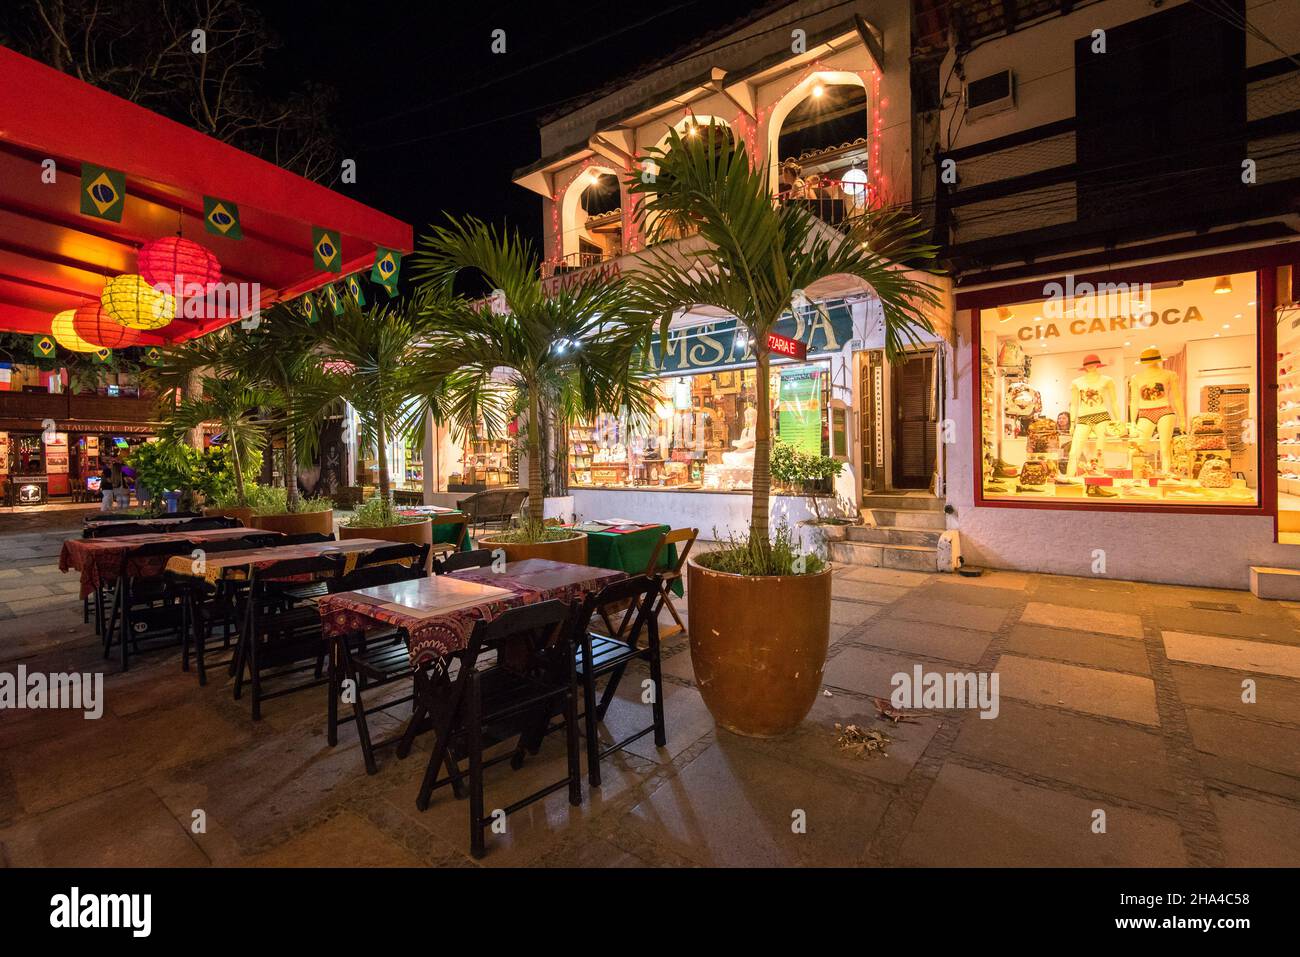 Buzios, Brazil - July 24, 2018: Tables of the restaurant in the street awaiting for guests. Stock Photo